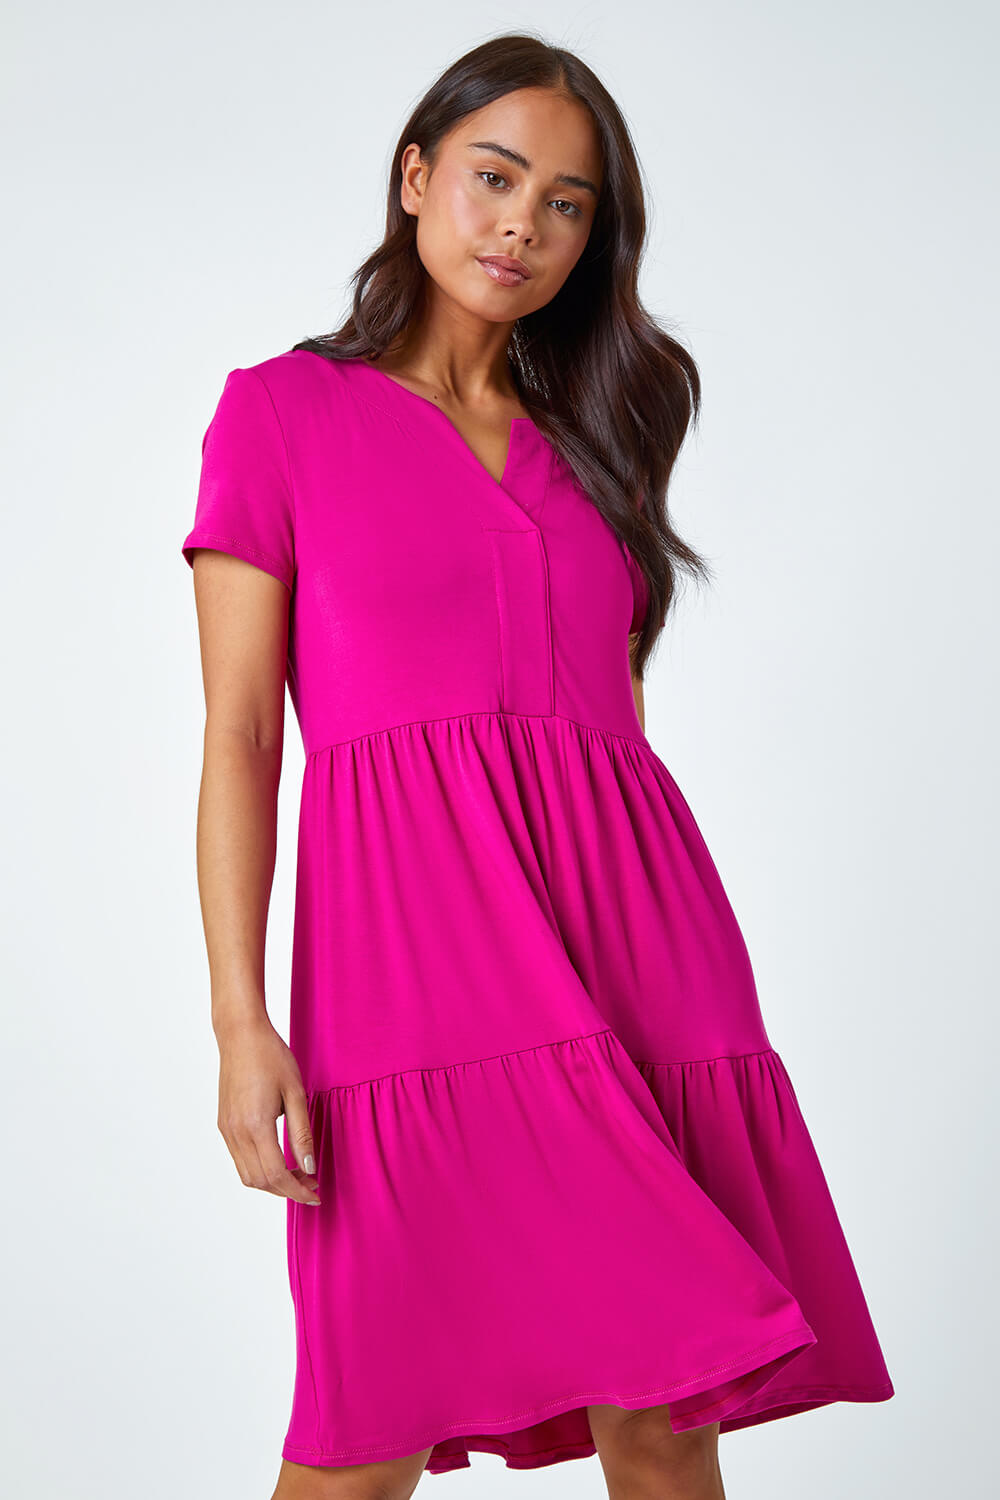 PINK Petite Tiered Stretch T-Shirt Dress, Image 2 of 5